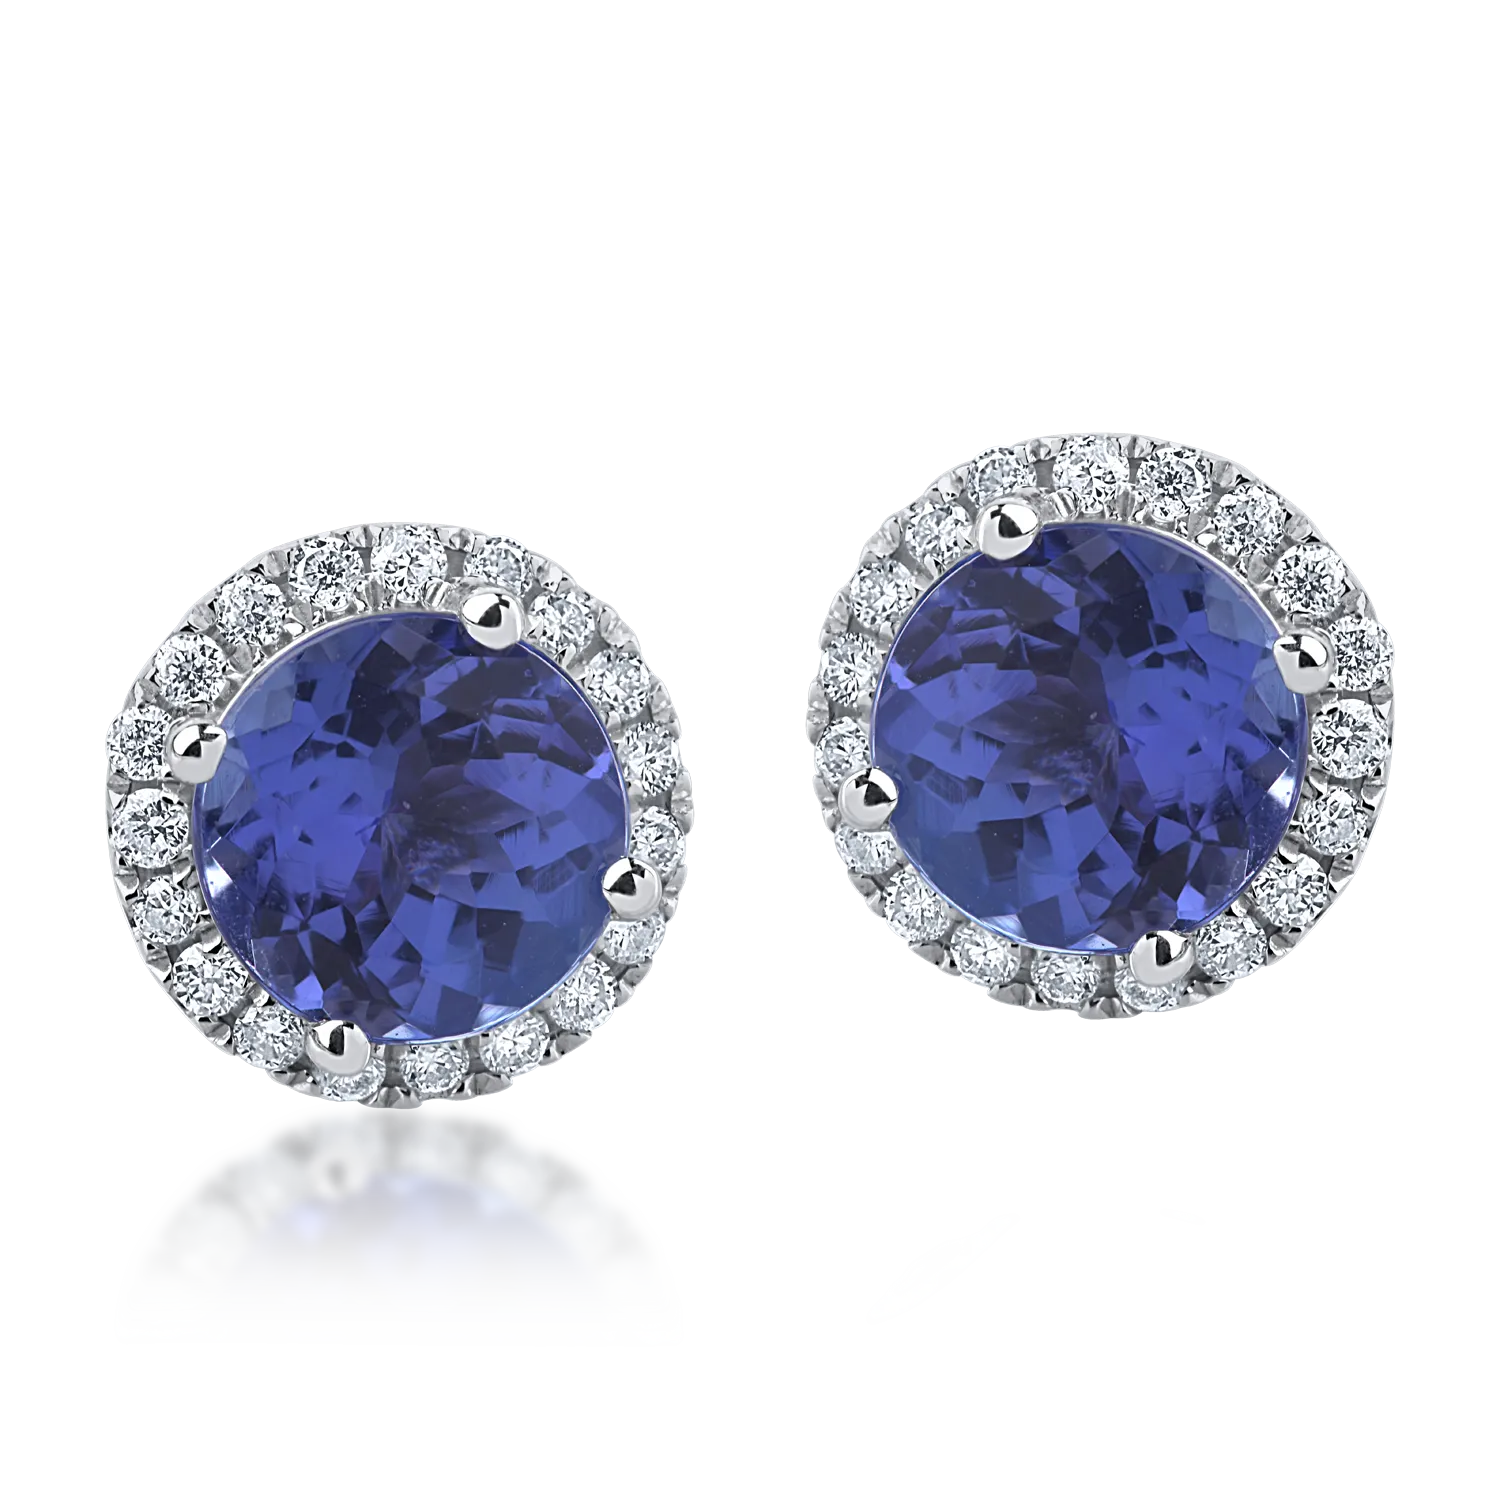 White gold earrings with 1.89ct tanzanites and 0.19ct diamonds